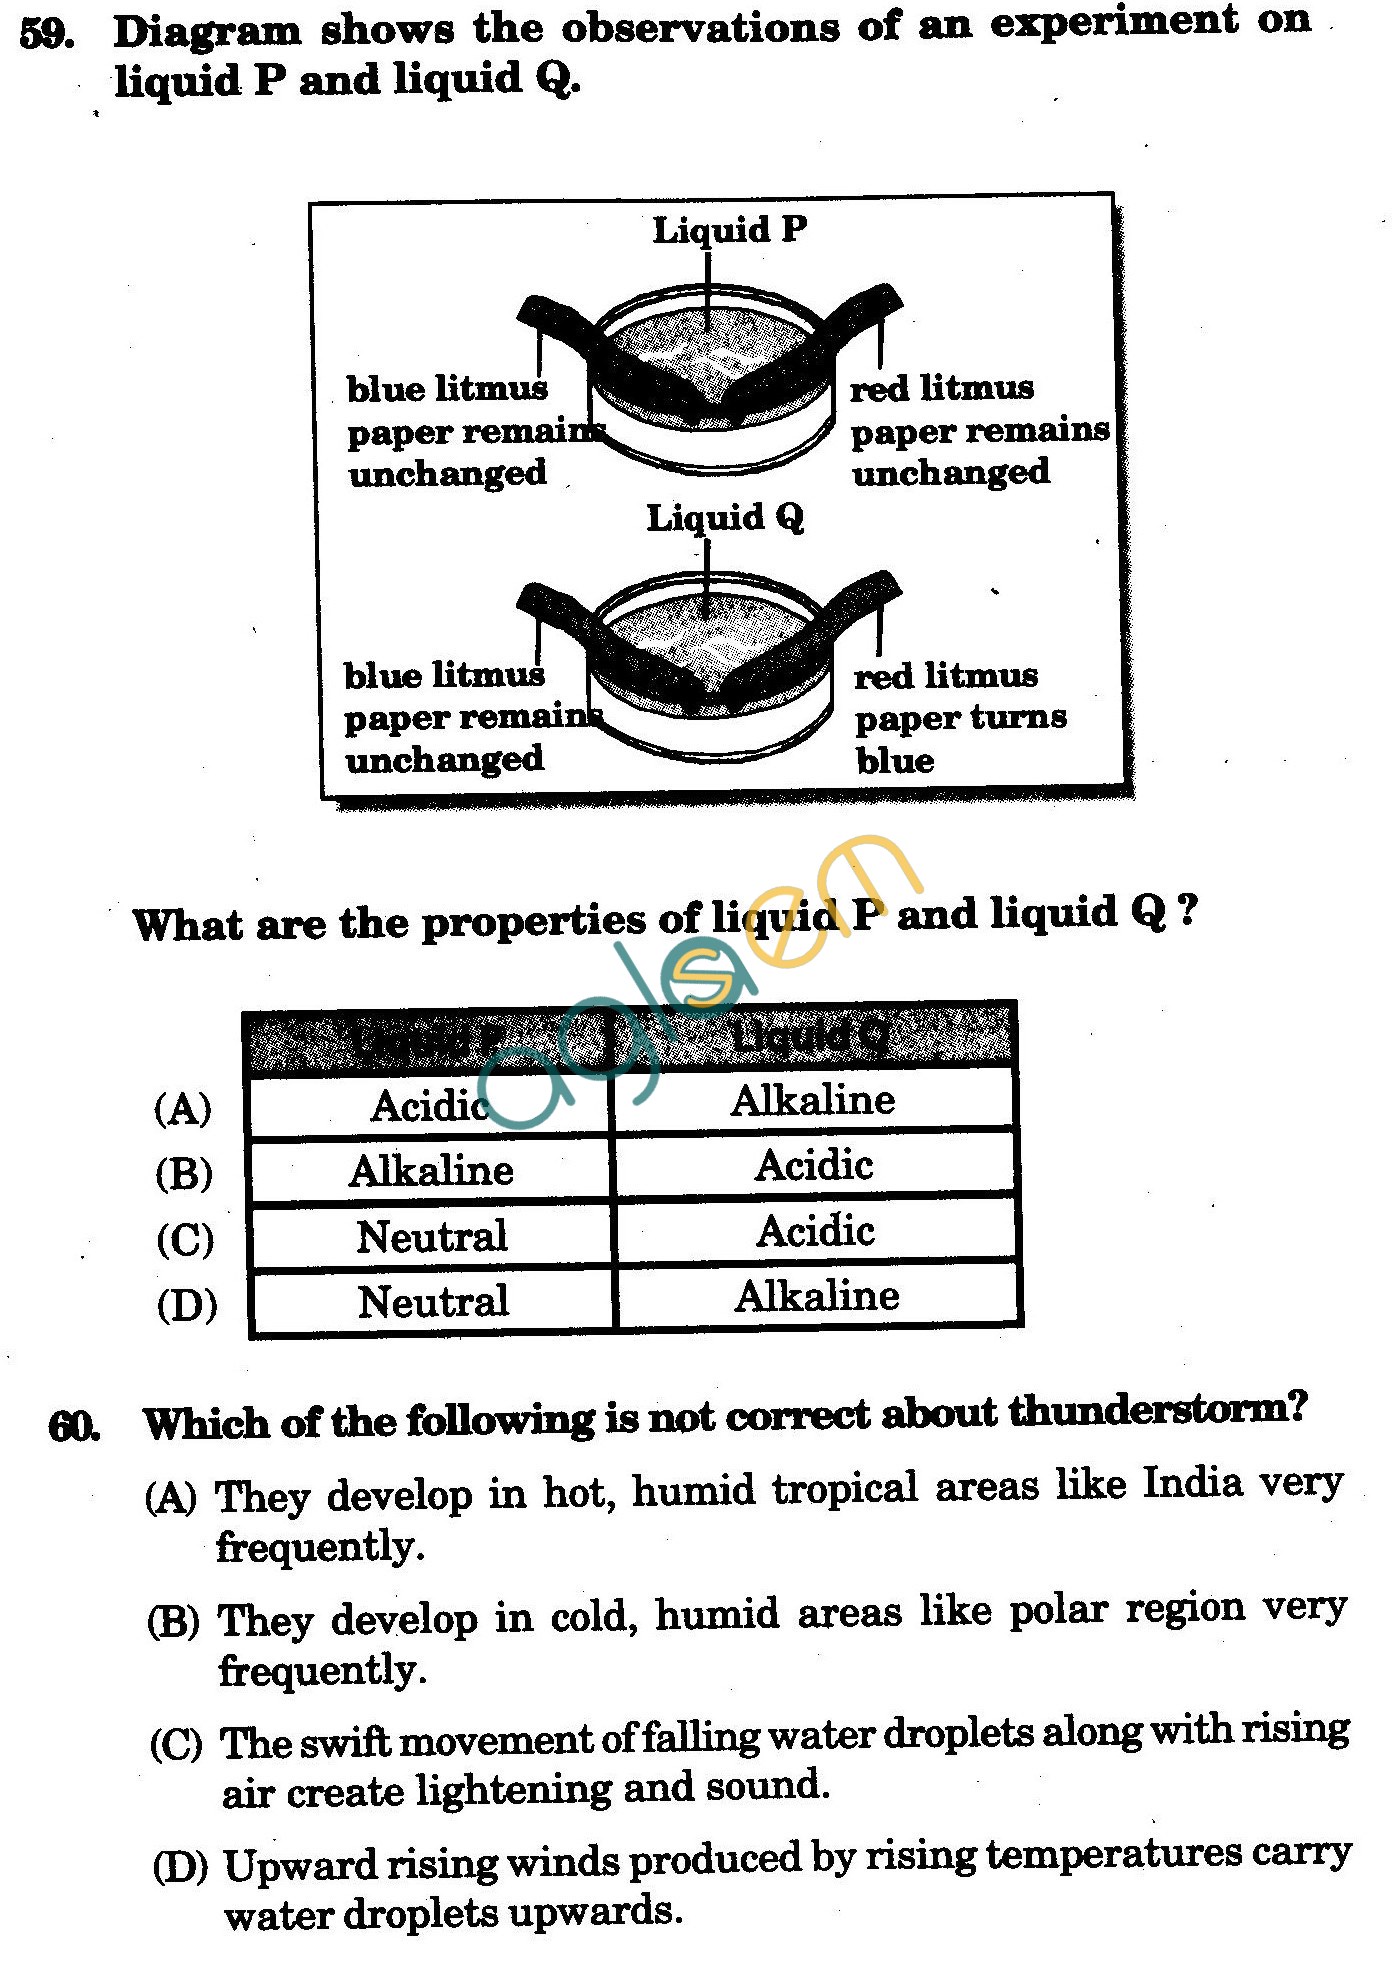 NSTSE 2010 Class VII Question Paper with Answers - Chemistry